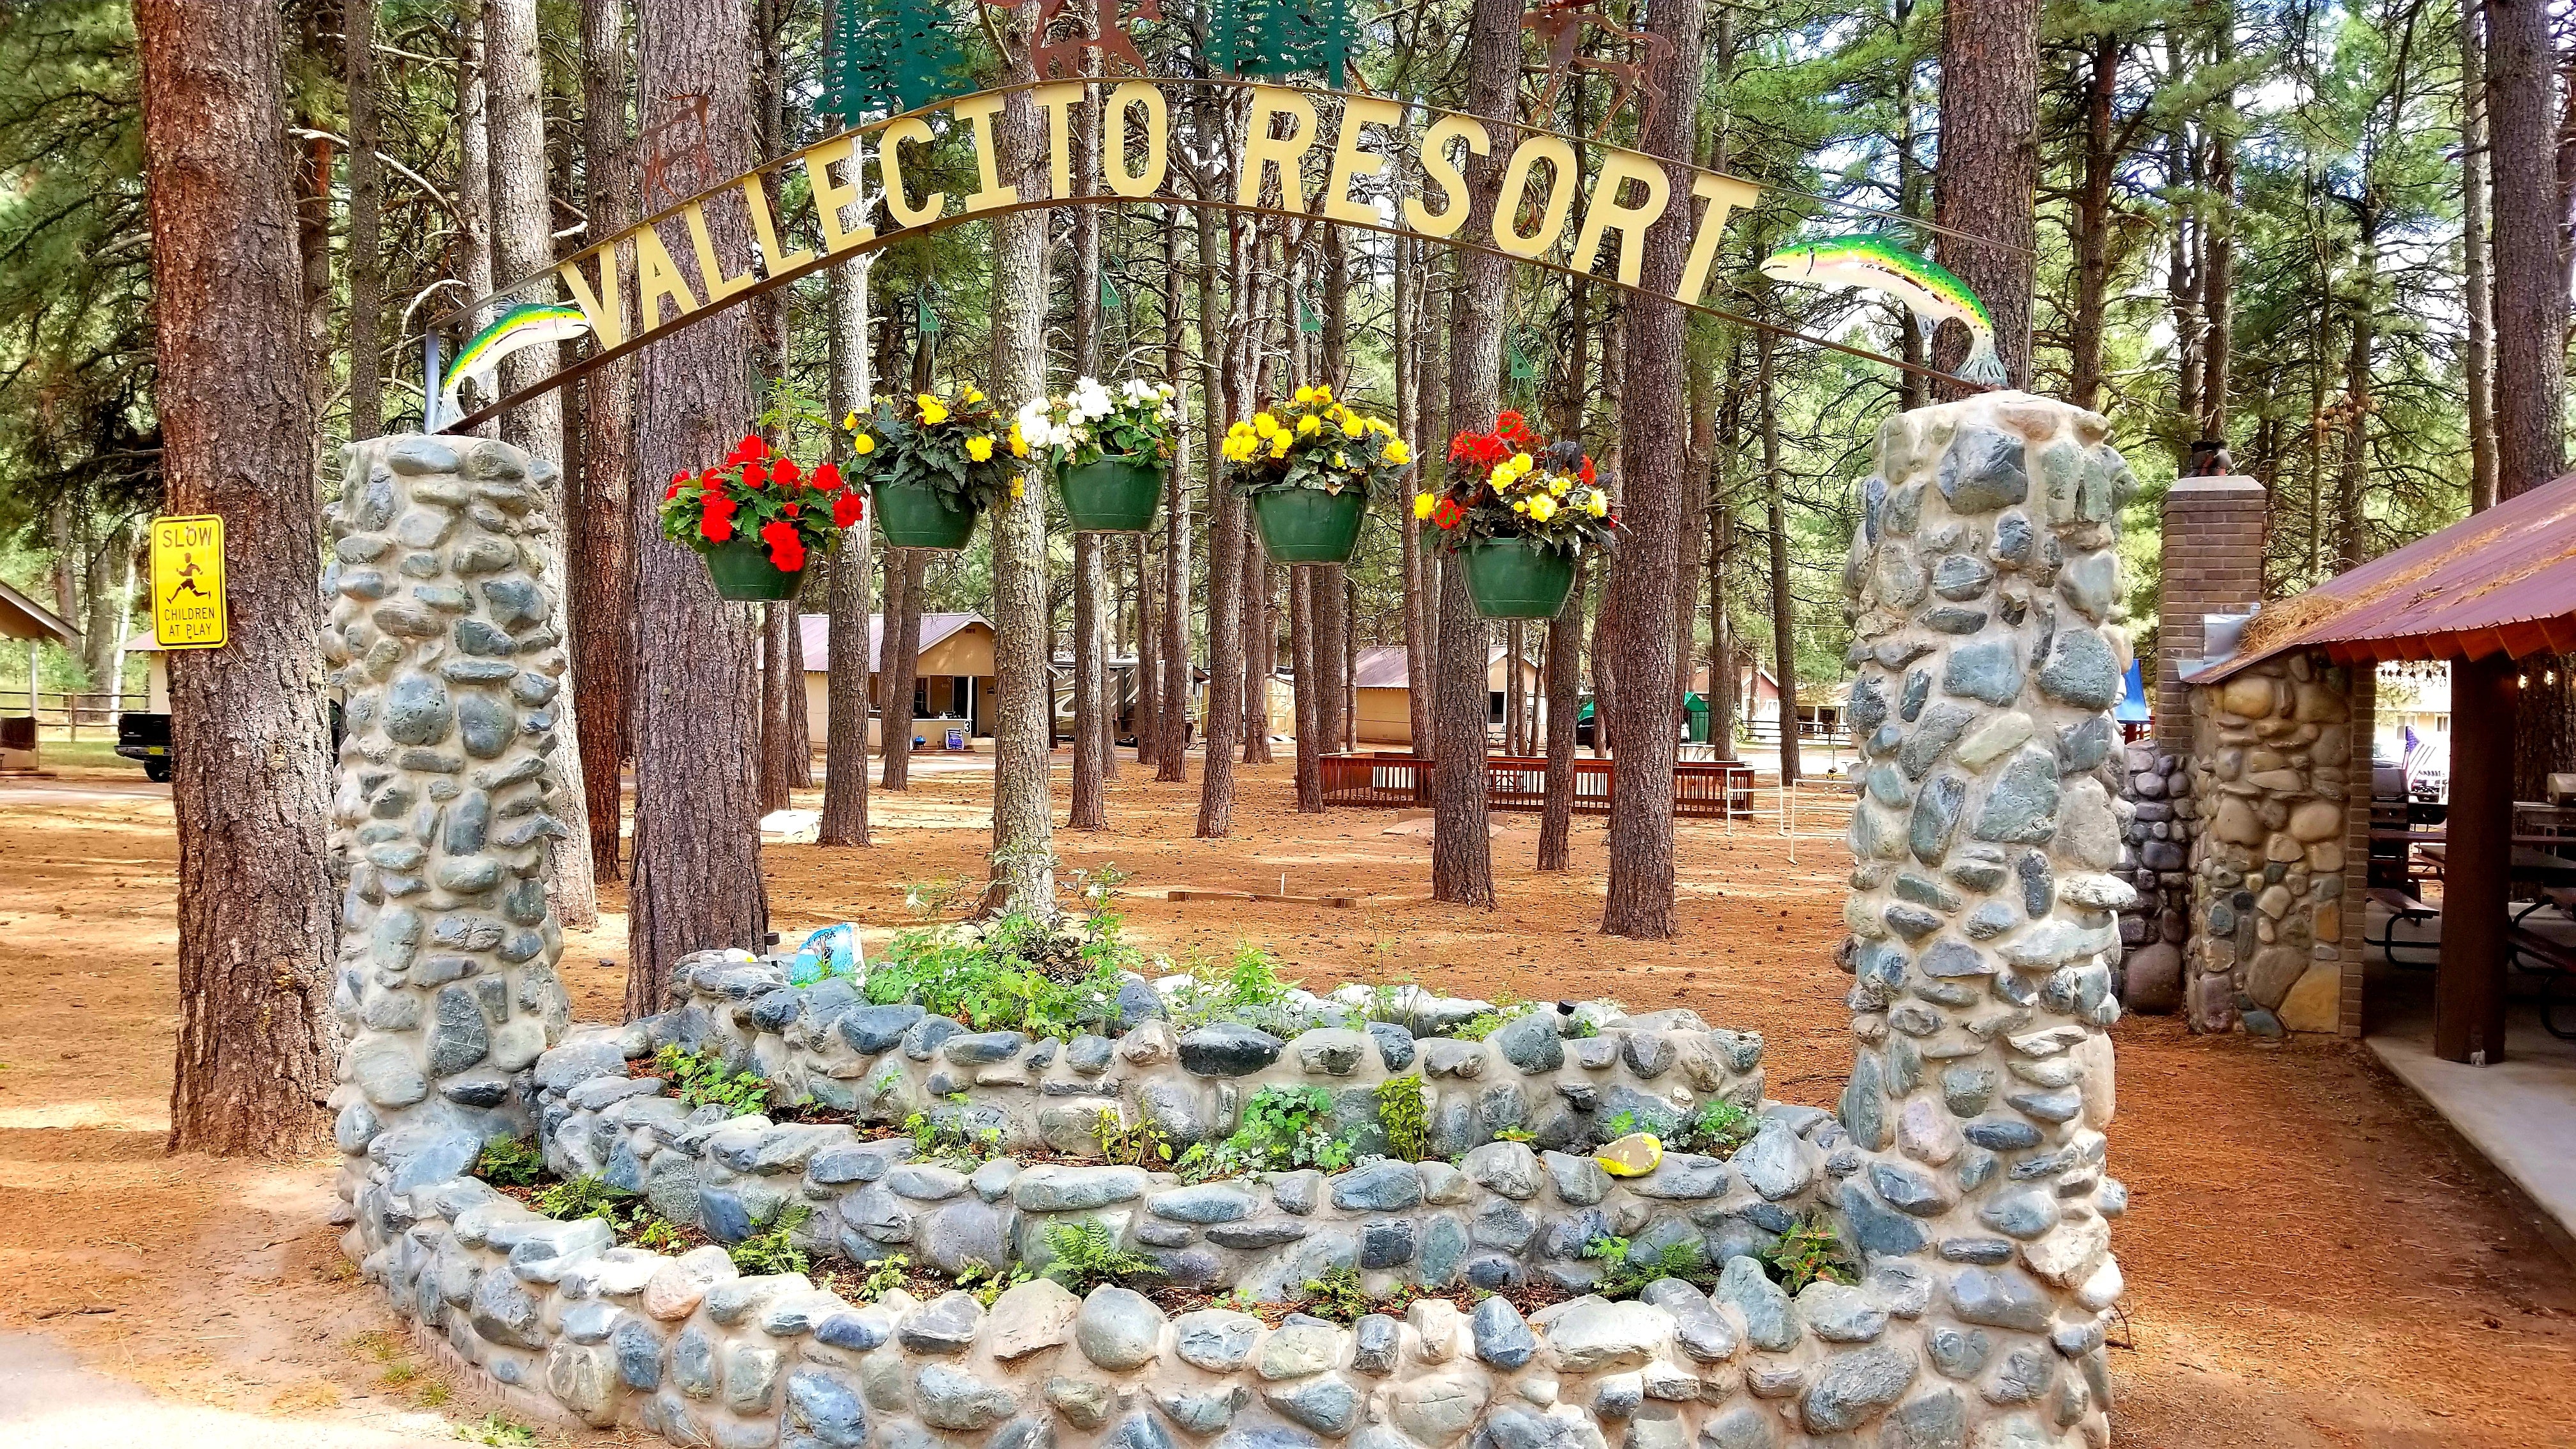 Camper submitted image from Vallecito Resort - 4